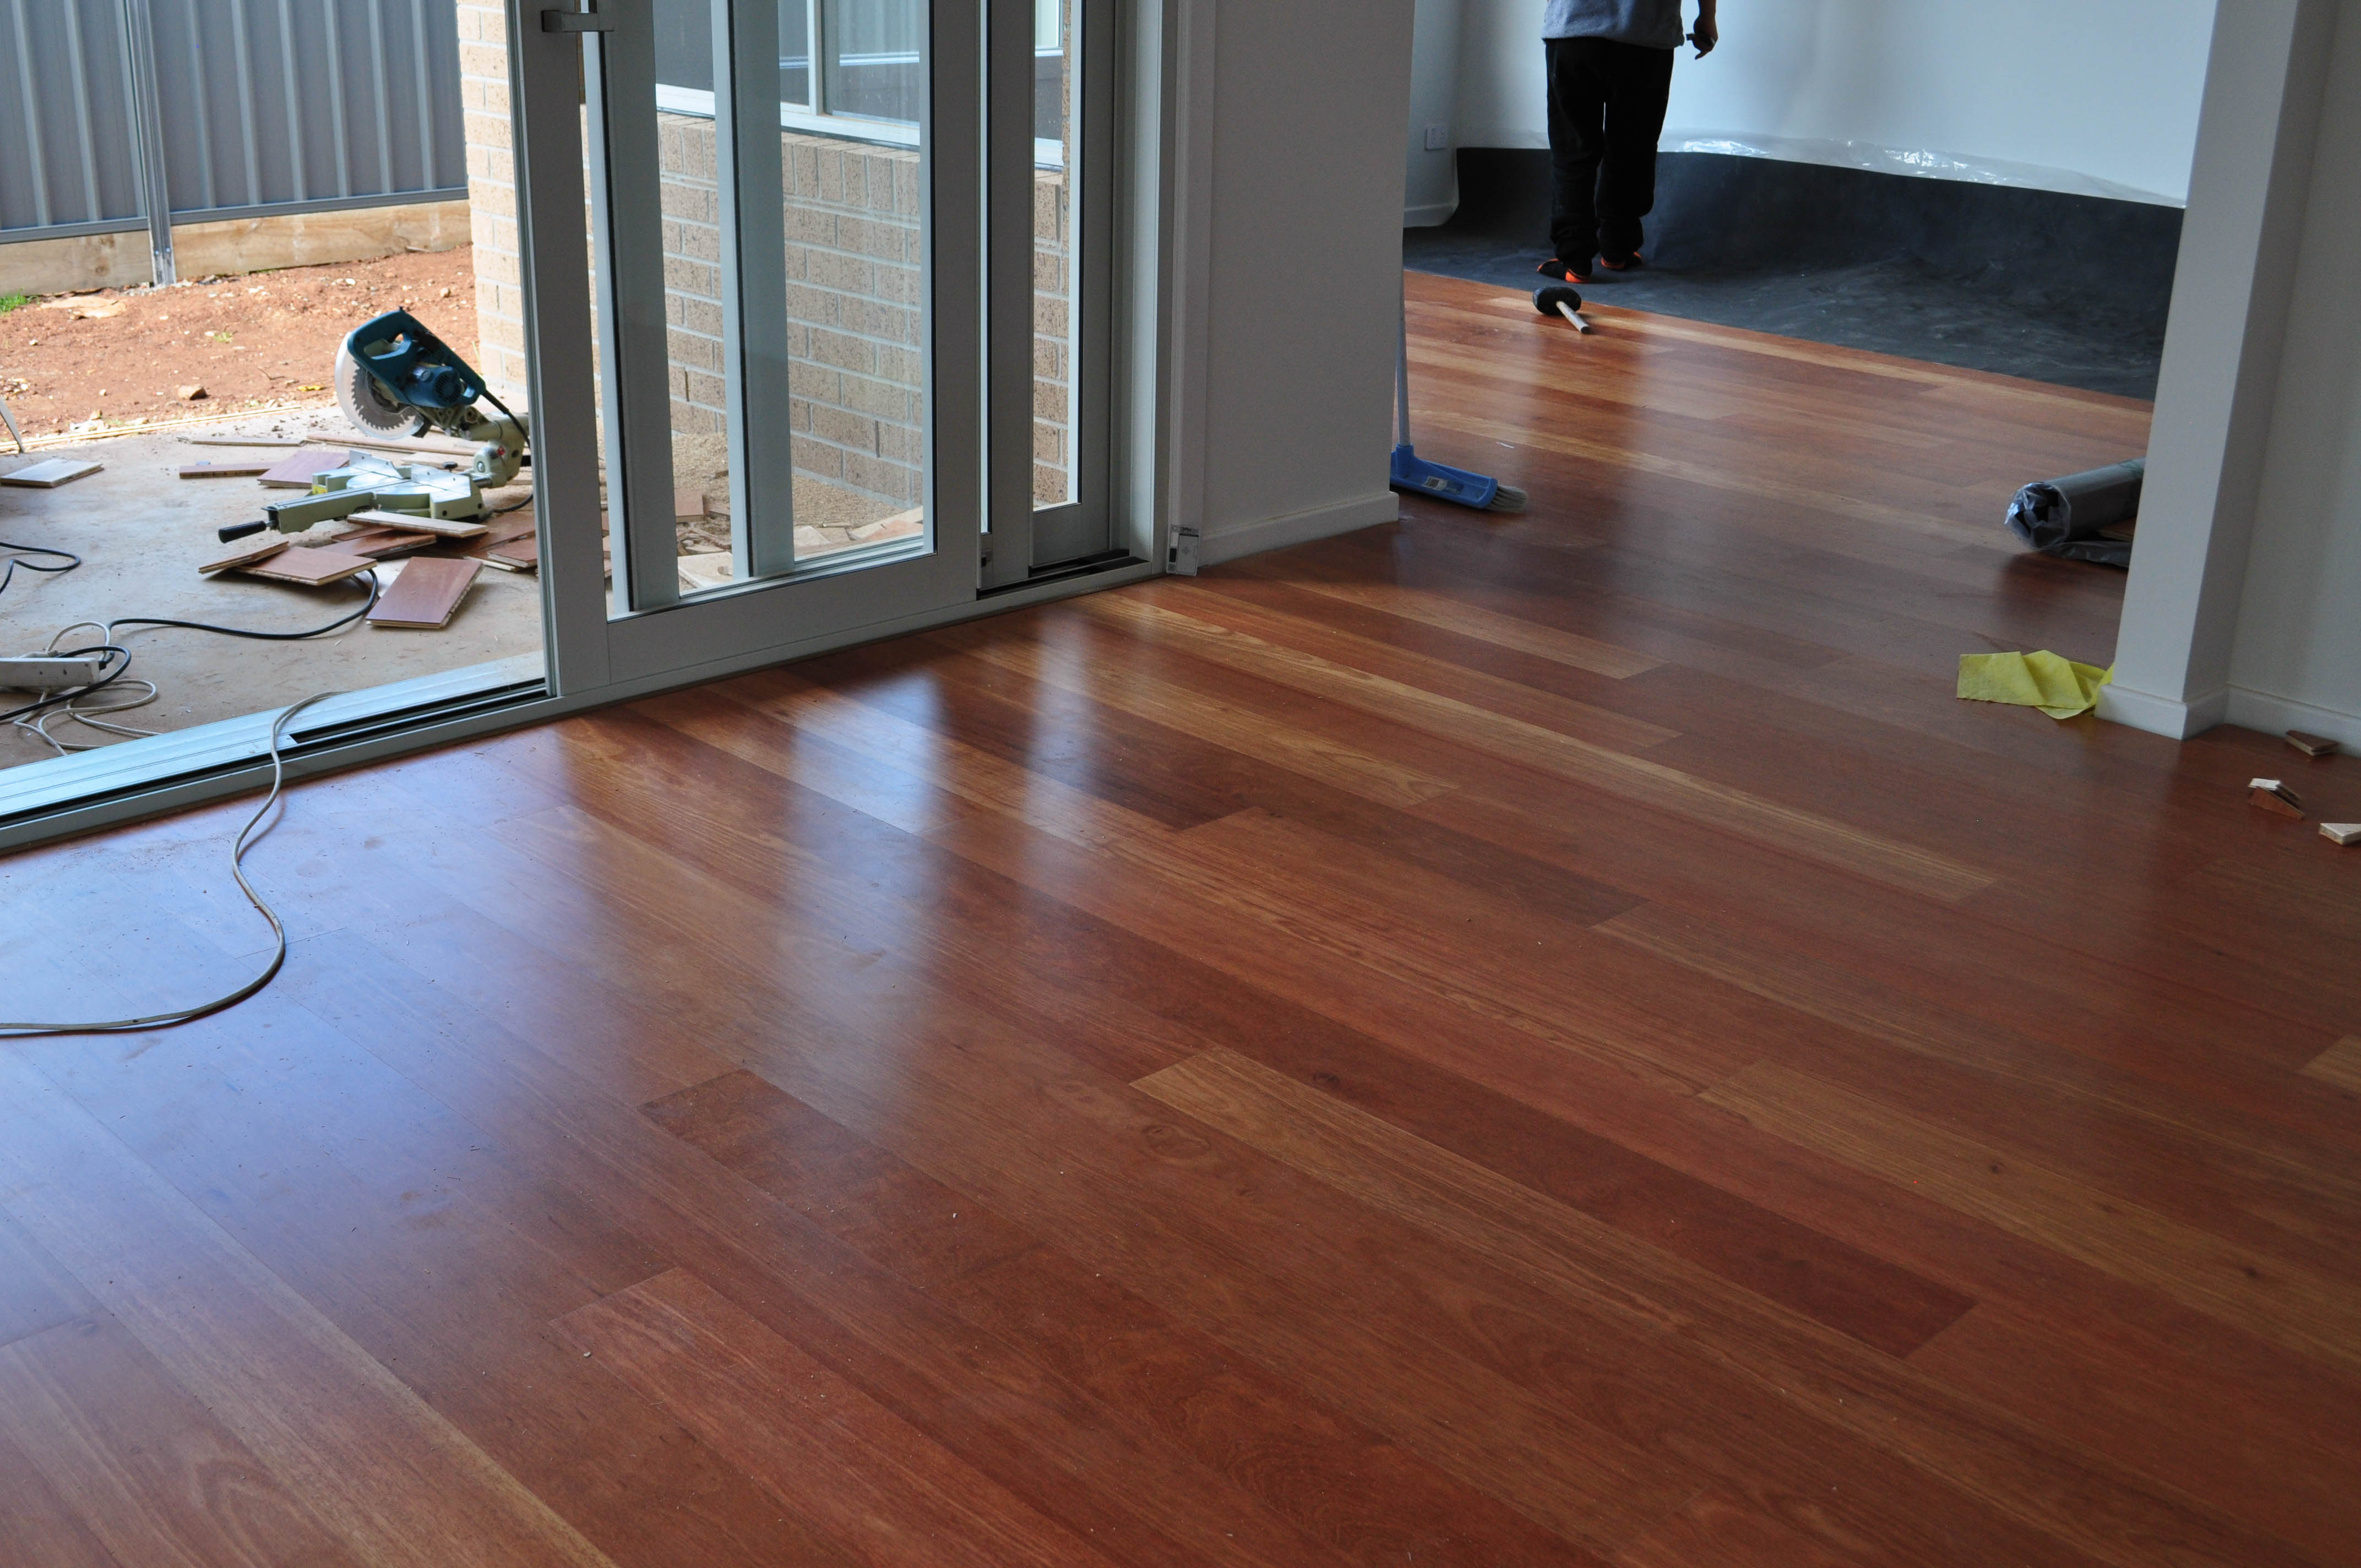 Kempes engineered floating hardwood timber flooring installed in a loungeroom by Concord floors in a home in Melton.